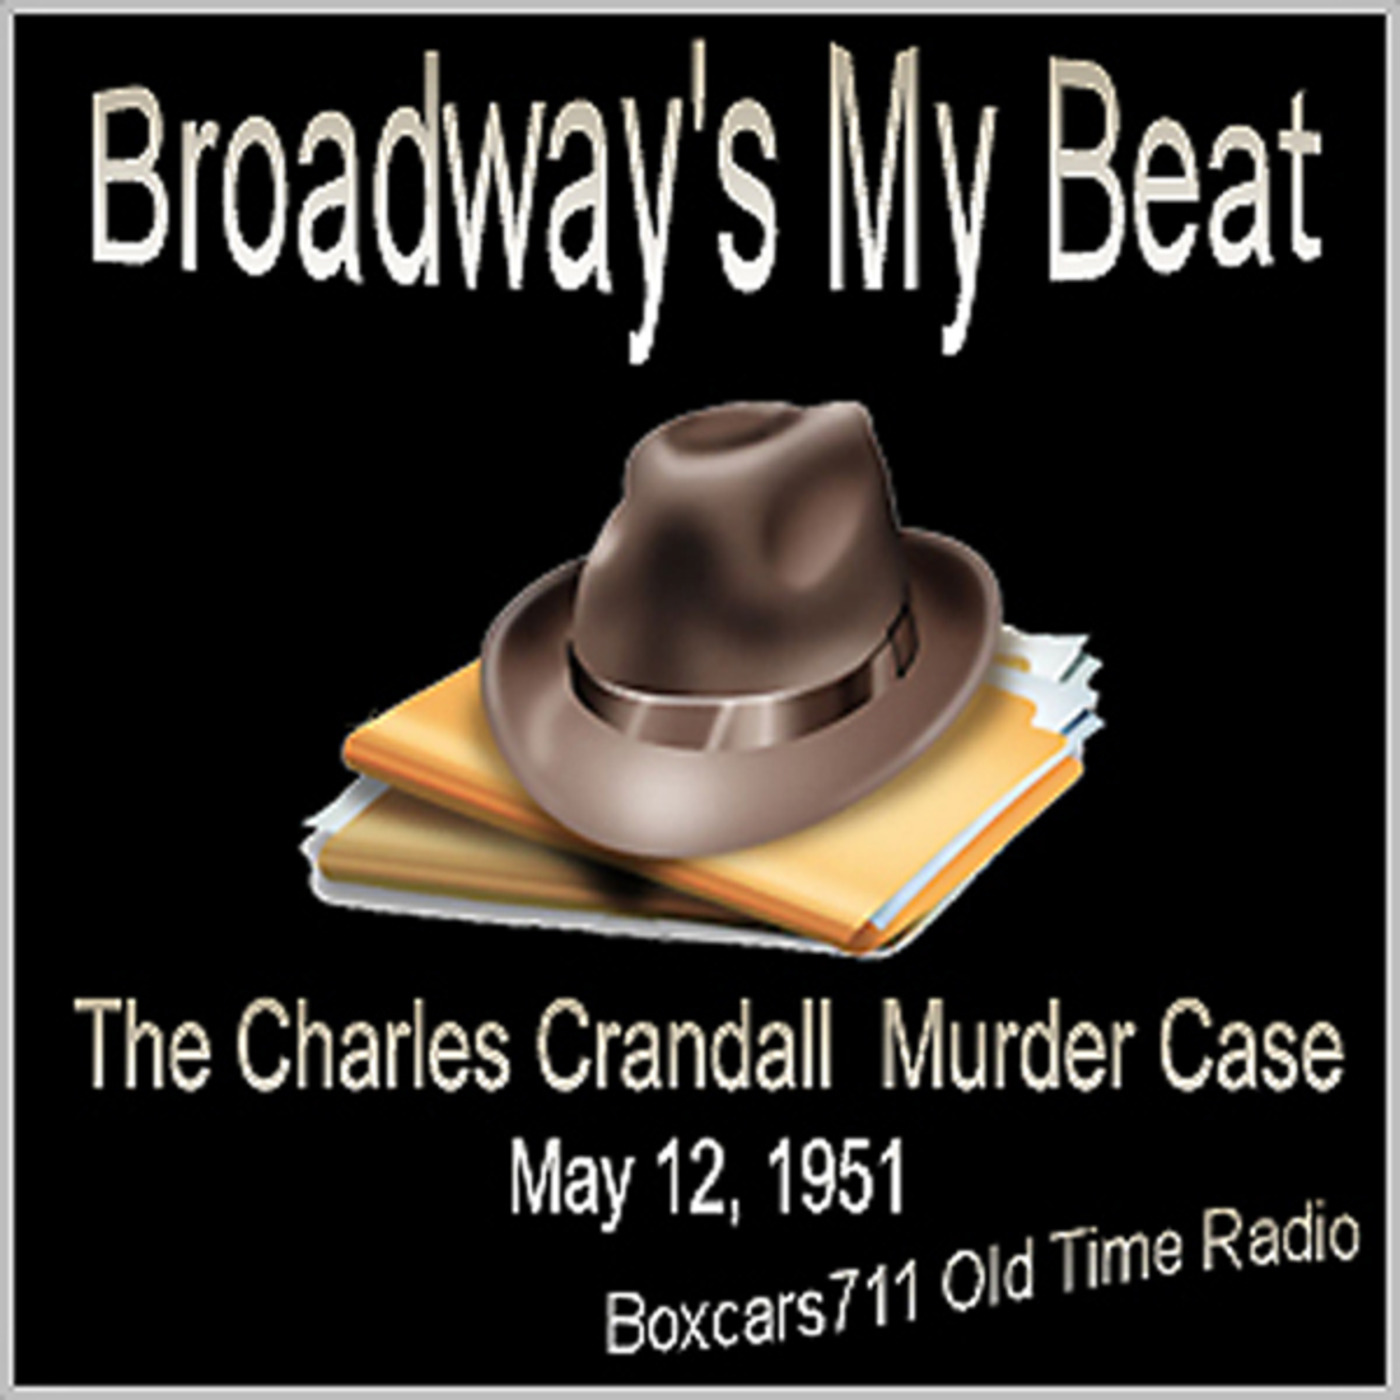 Episode 9599: Broadway Is My Beat - The Charles Crandall Murder Case (05-12-51)